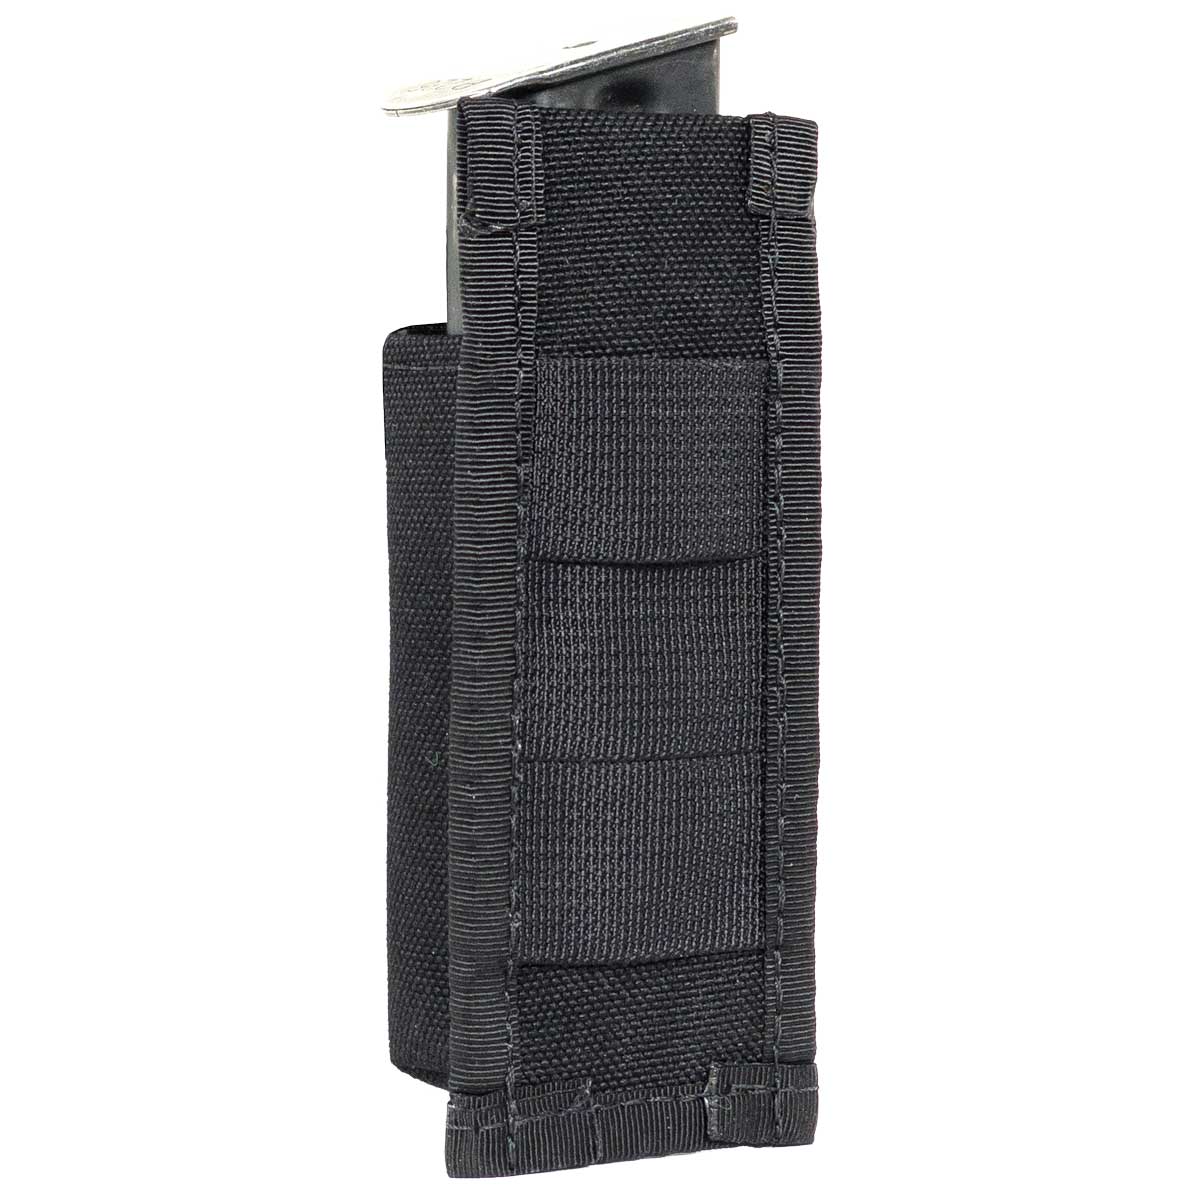 Single Mag Open Top Molle Pocket for Cowell Tactical Vest